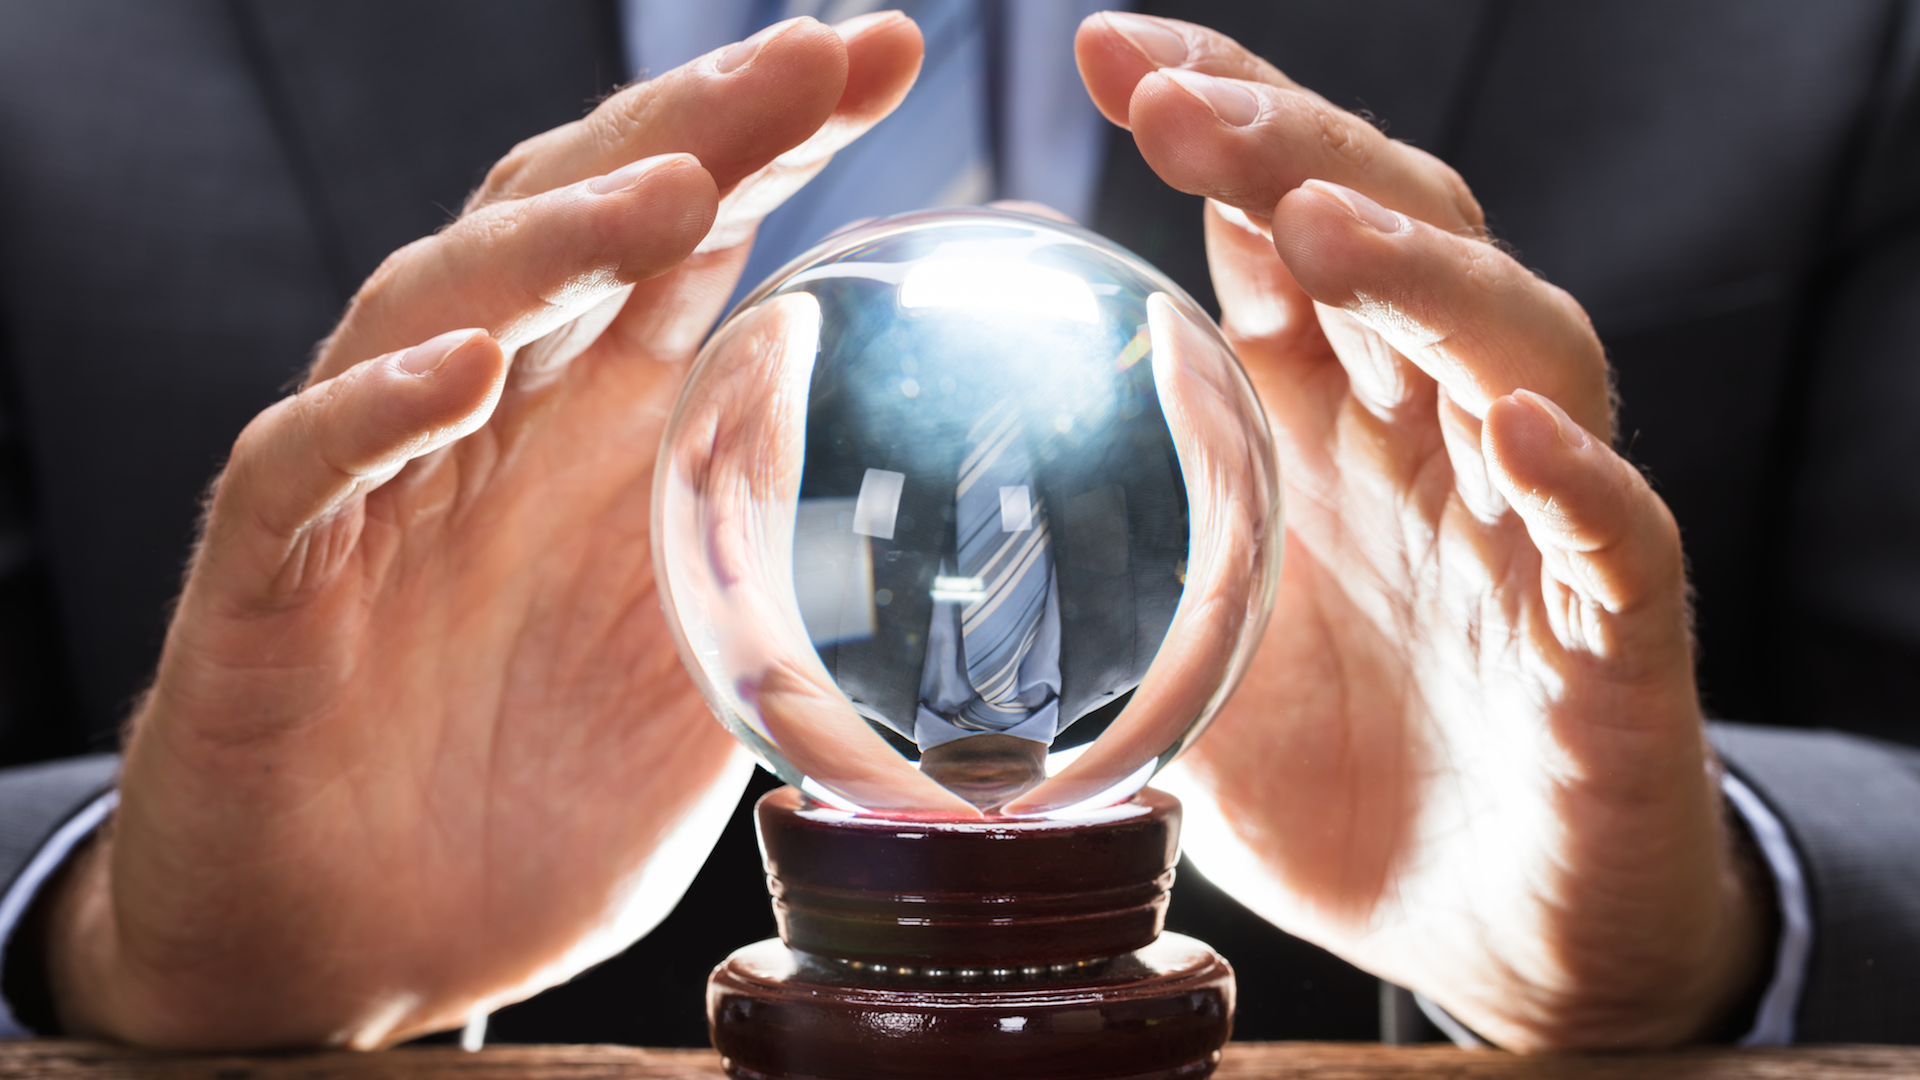 Human is obsessed with prediction using a crystal ball.